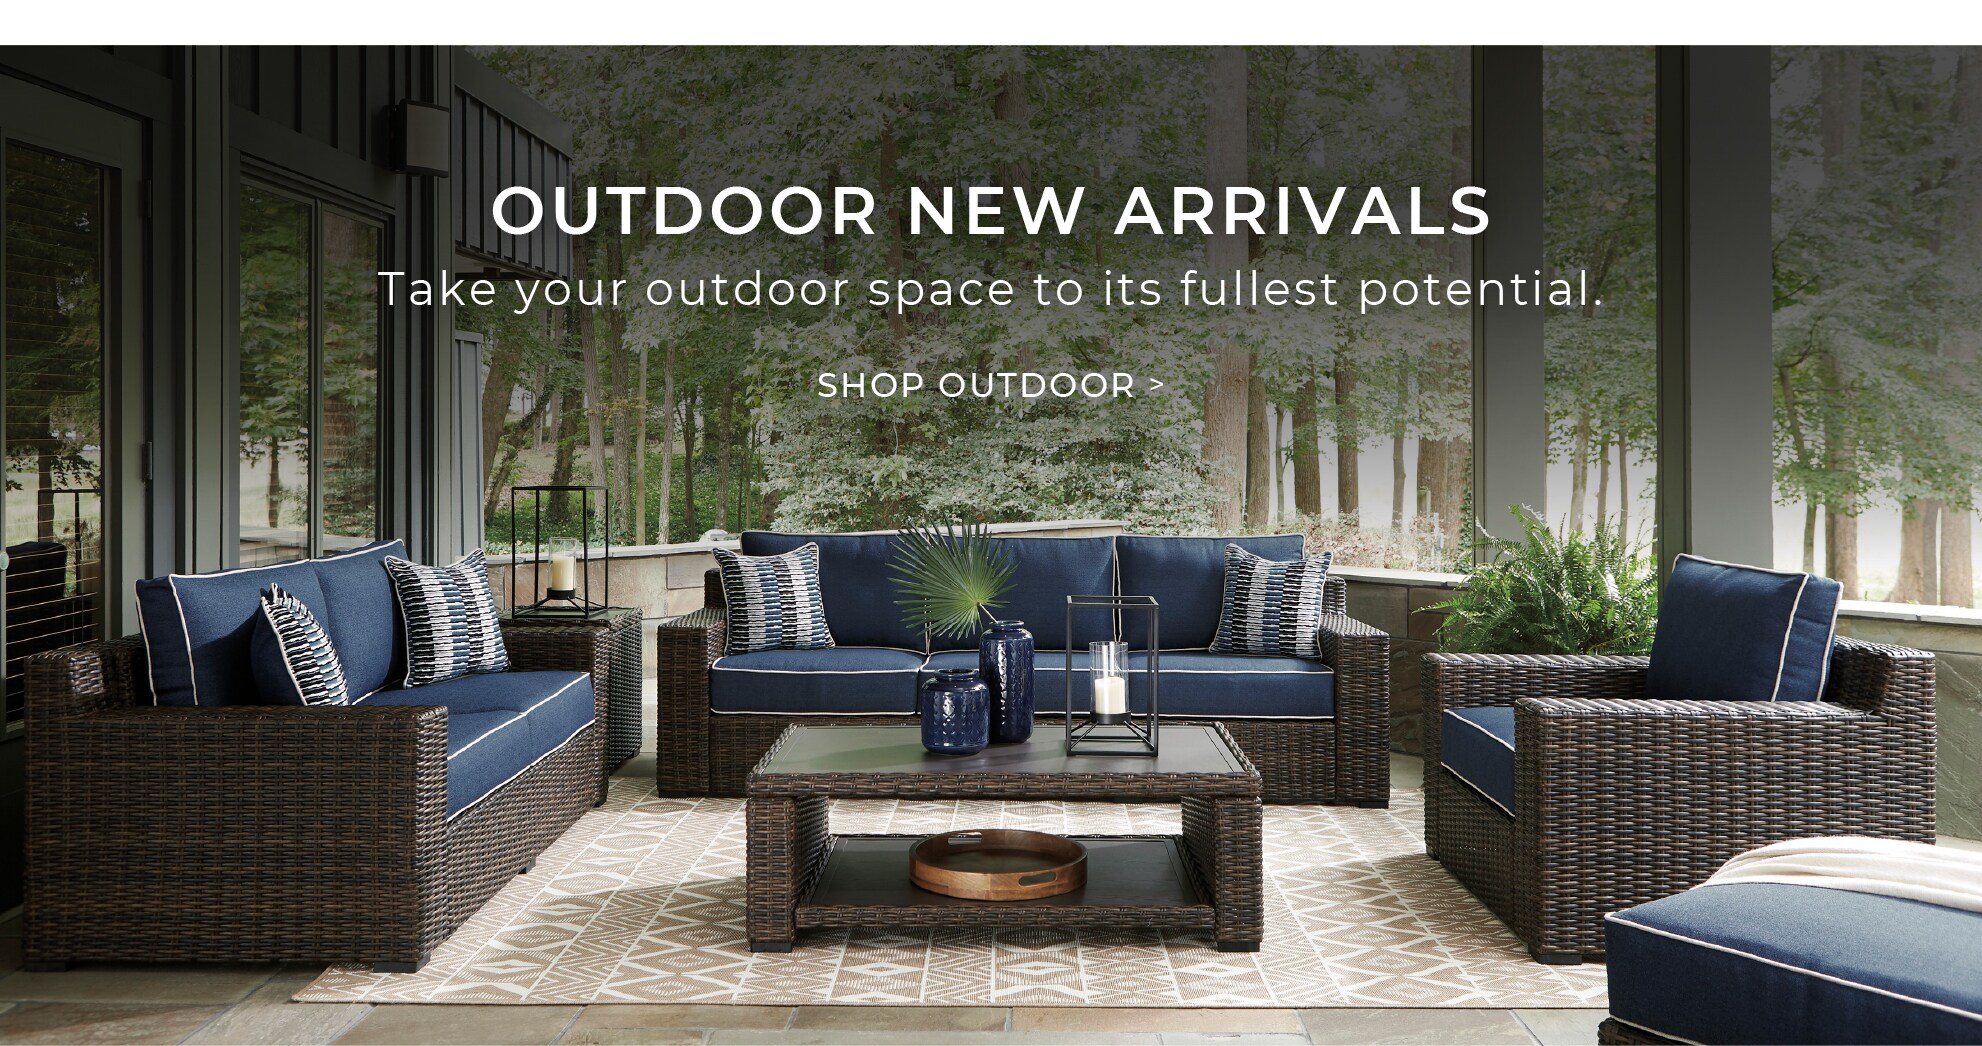 Outdoor is here, shop the new collection now.